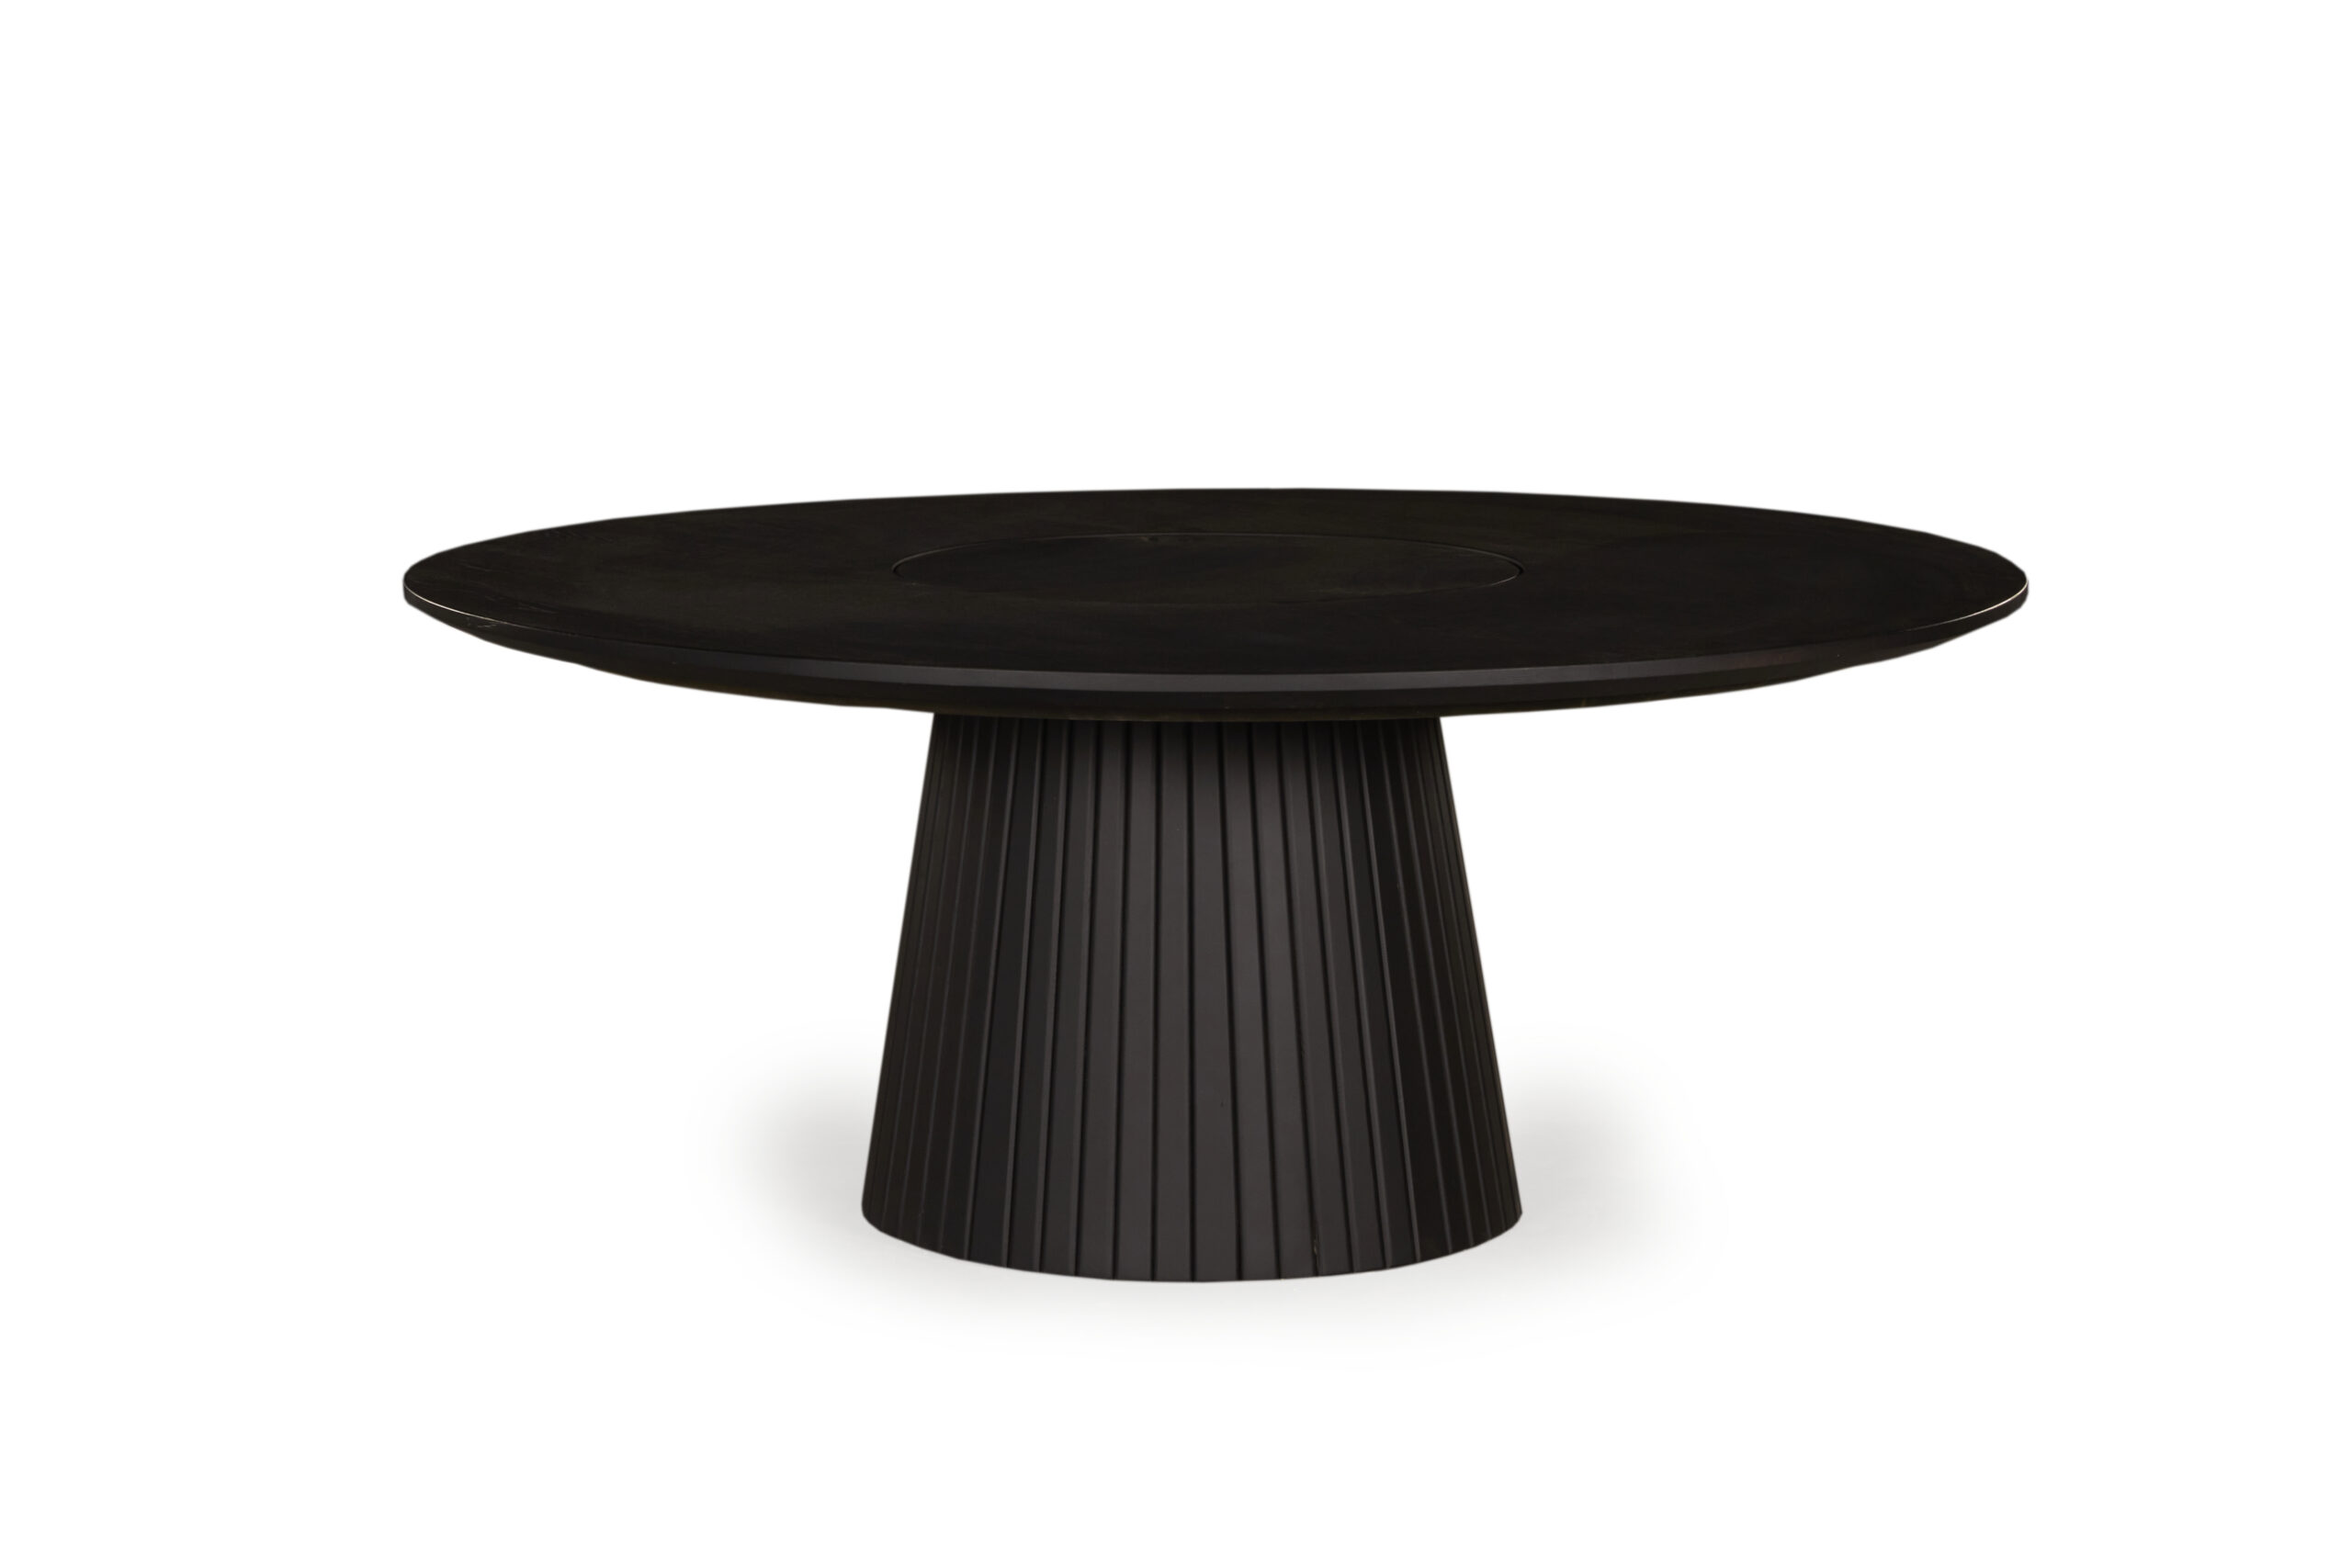 Surry Hills Round Dining Table featuring brushed black American Oak construction 1800mm diameter undercut bevel edge and built in lazy Susan Supported by a flat ribbed base